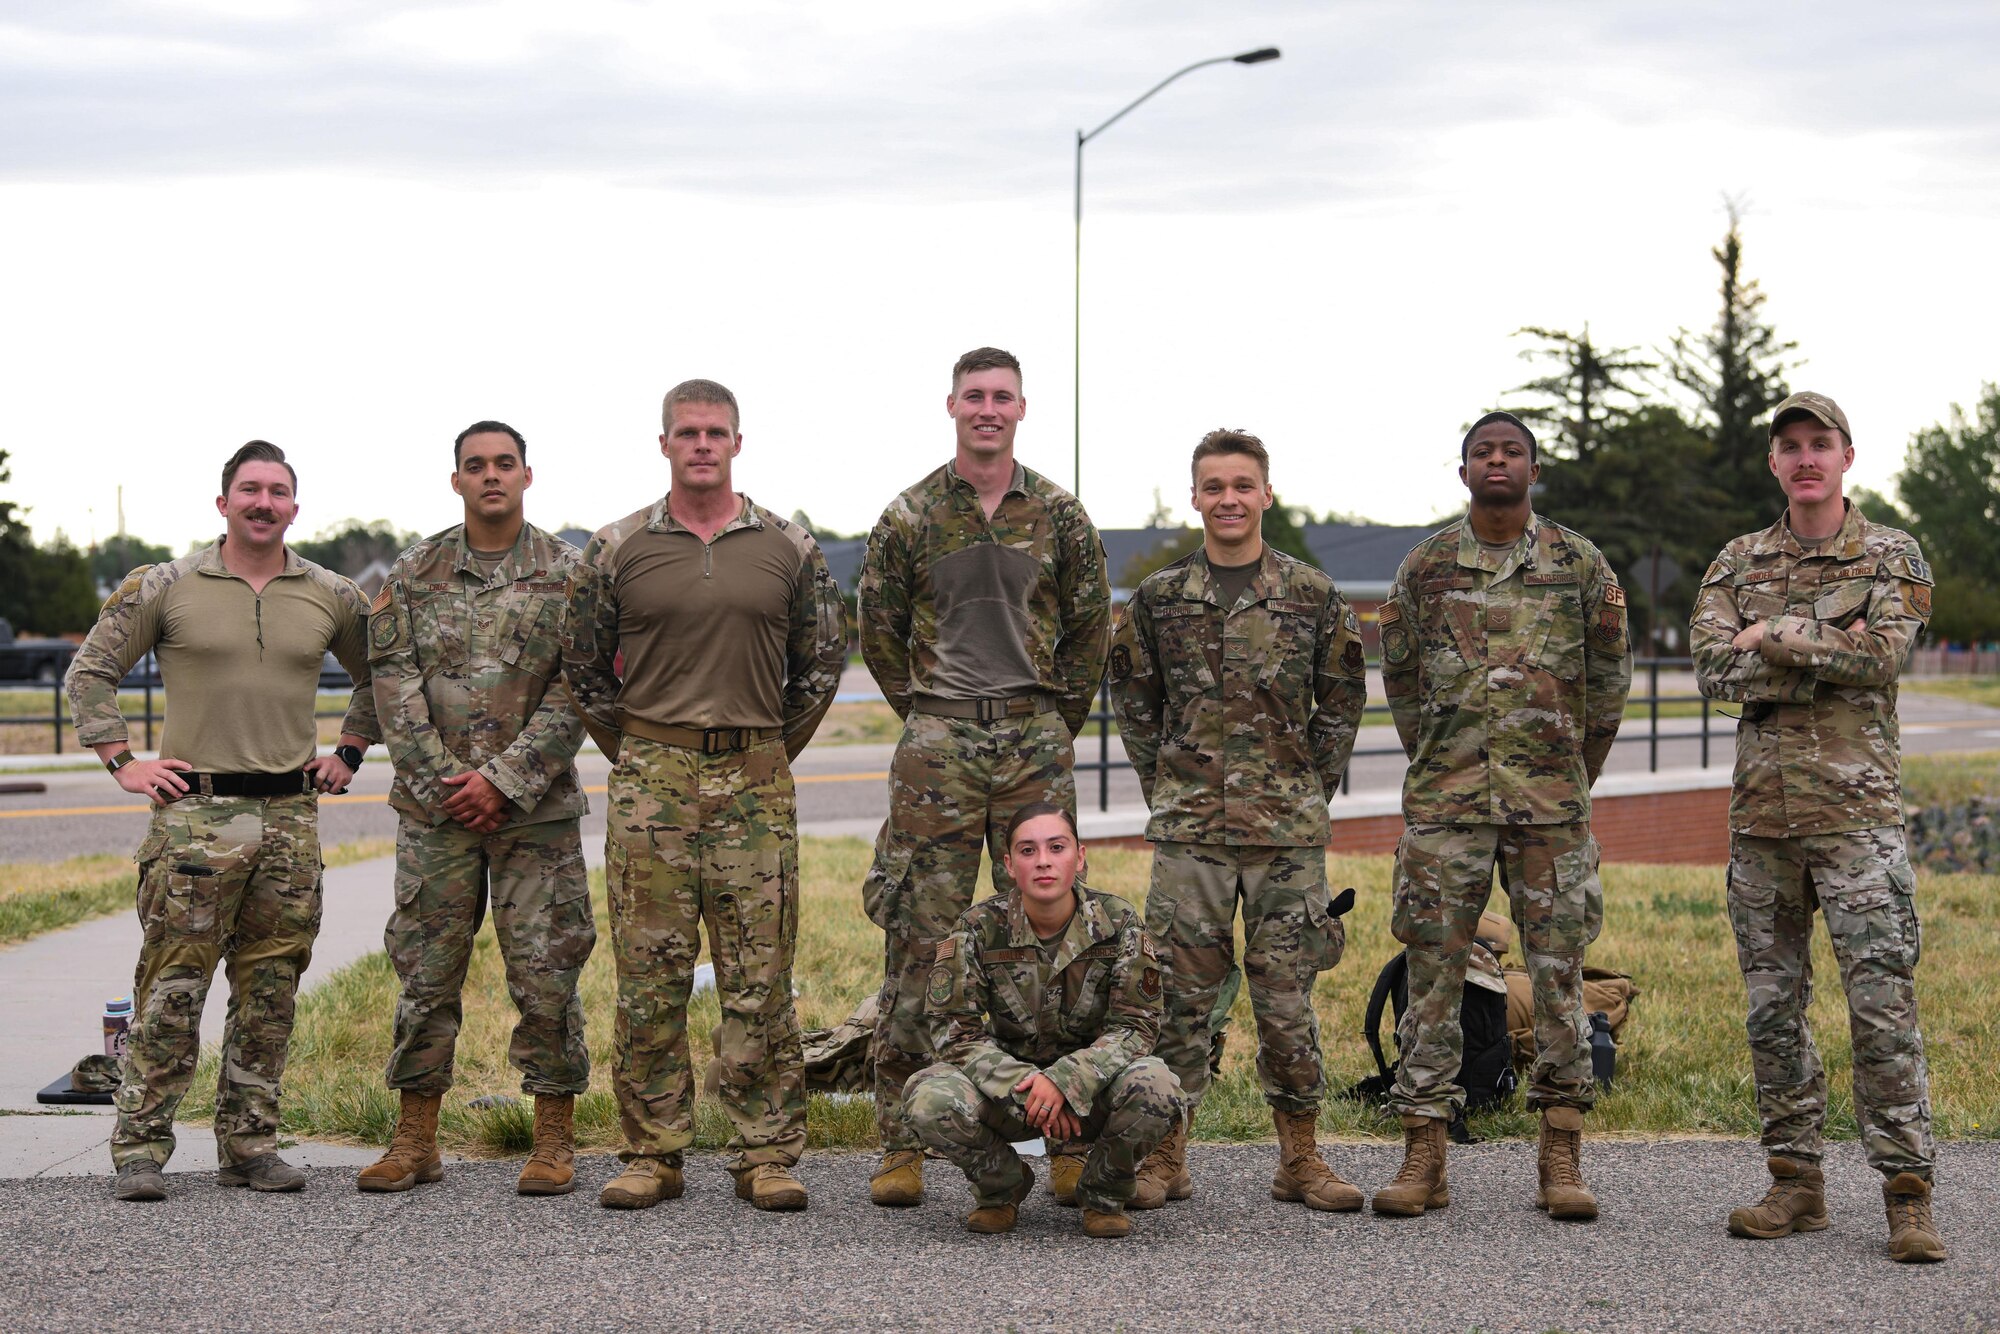 Airmen from the 90th Security Forces Squadron pose for a photo after completing a six-mile ruck during the Global Strike Challenge at F.E. Warren Air Force Base, Wyoming, June 8, 2021. Teams from across Air Force Global Strike Command will compete in events that require physical strength and endurance to prove their capabilities on the team. (U.S. Air Force photo by Airman 1st Class Faith Iris MacIlvaine)